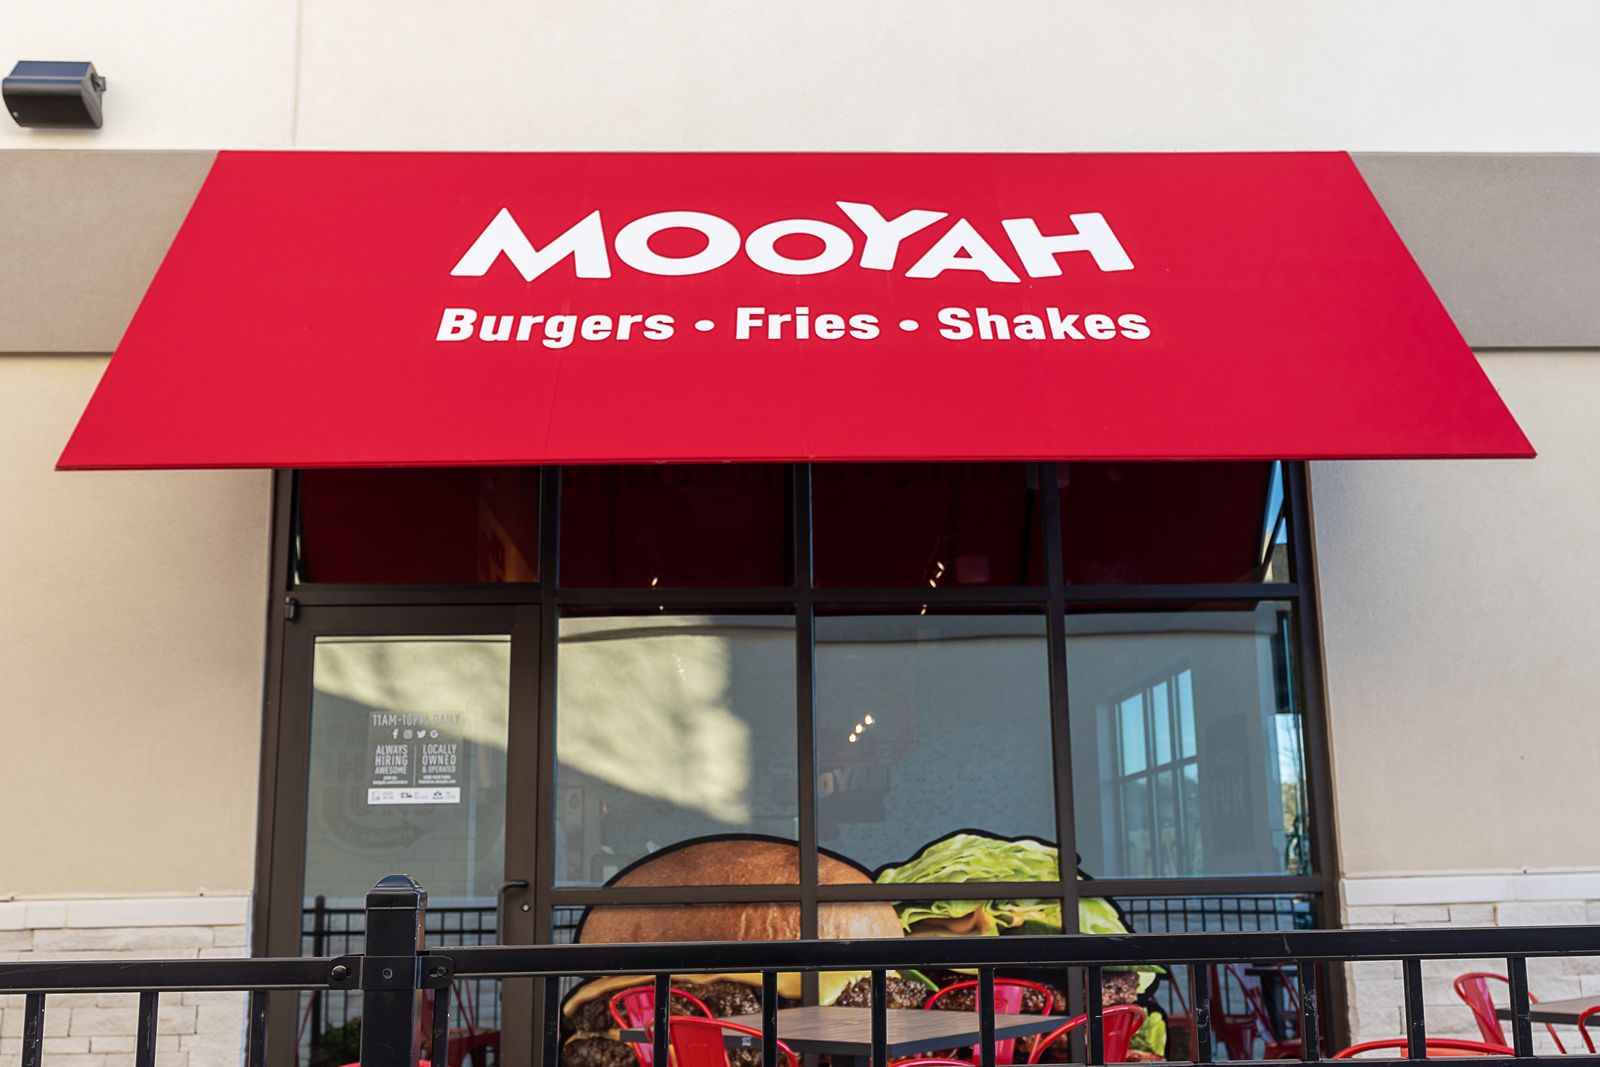 MOOYAH Burgers, Fries & Shakes Signs a Deal Every 2.5 Days in Q3 With Commitments for 22 Restaurants